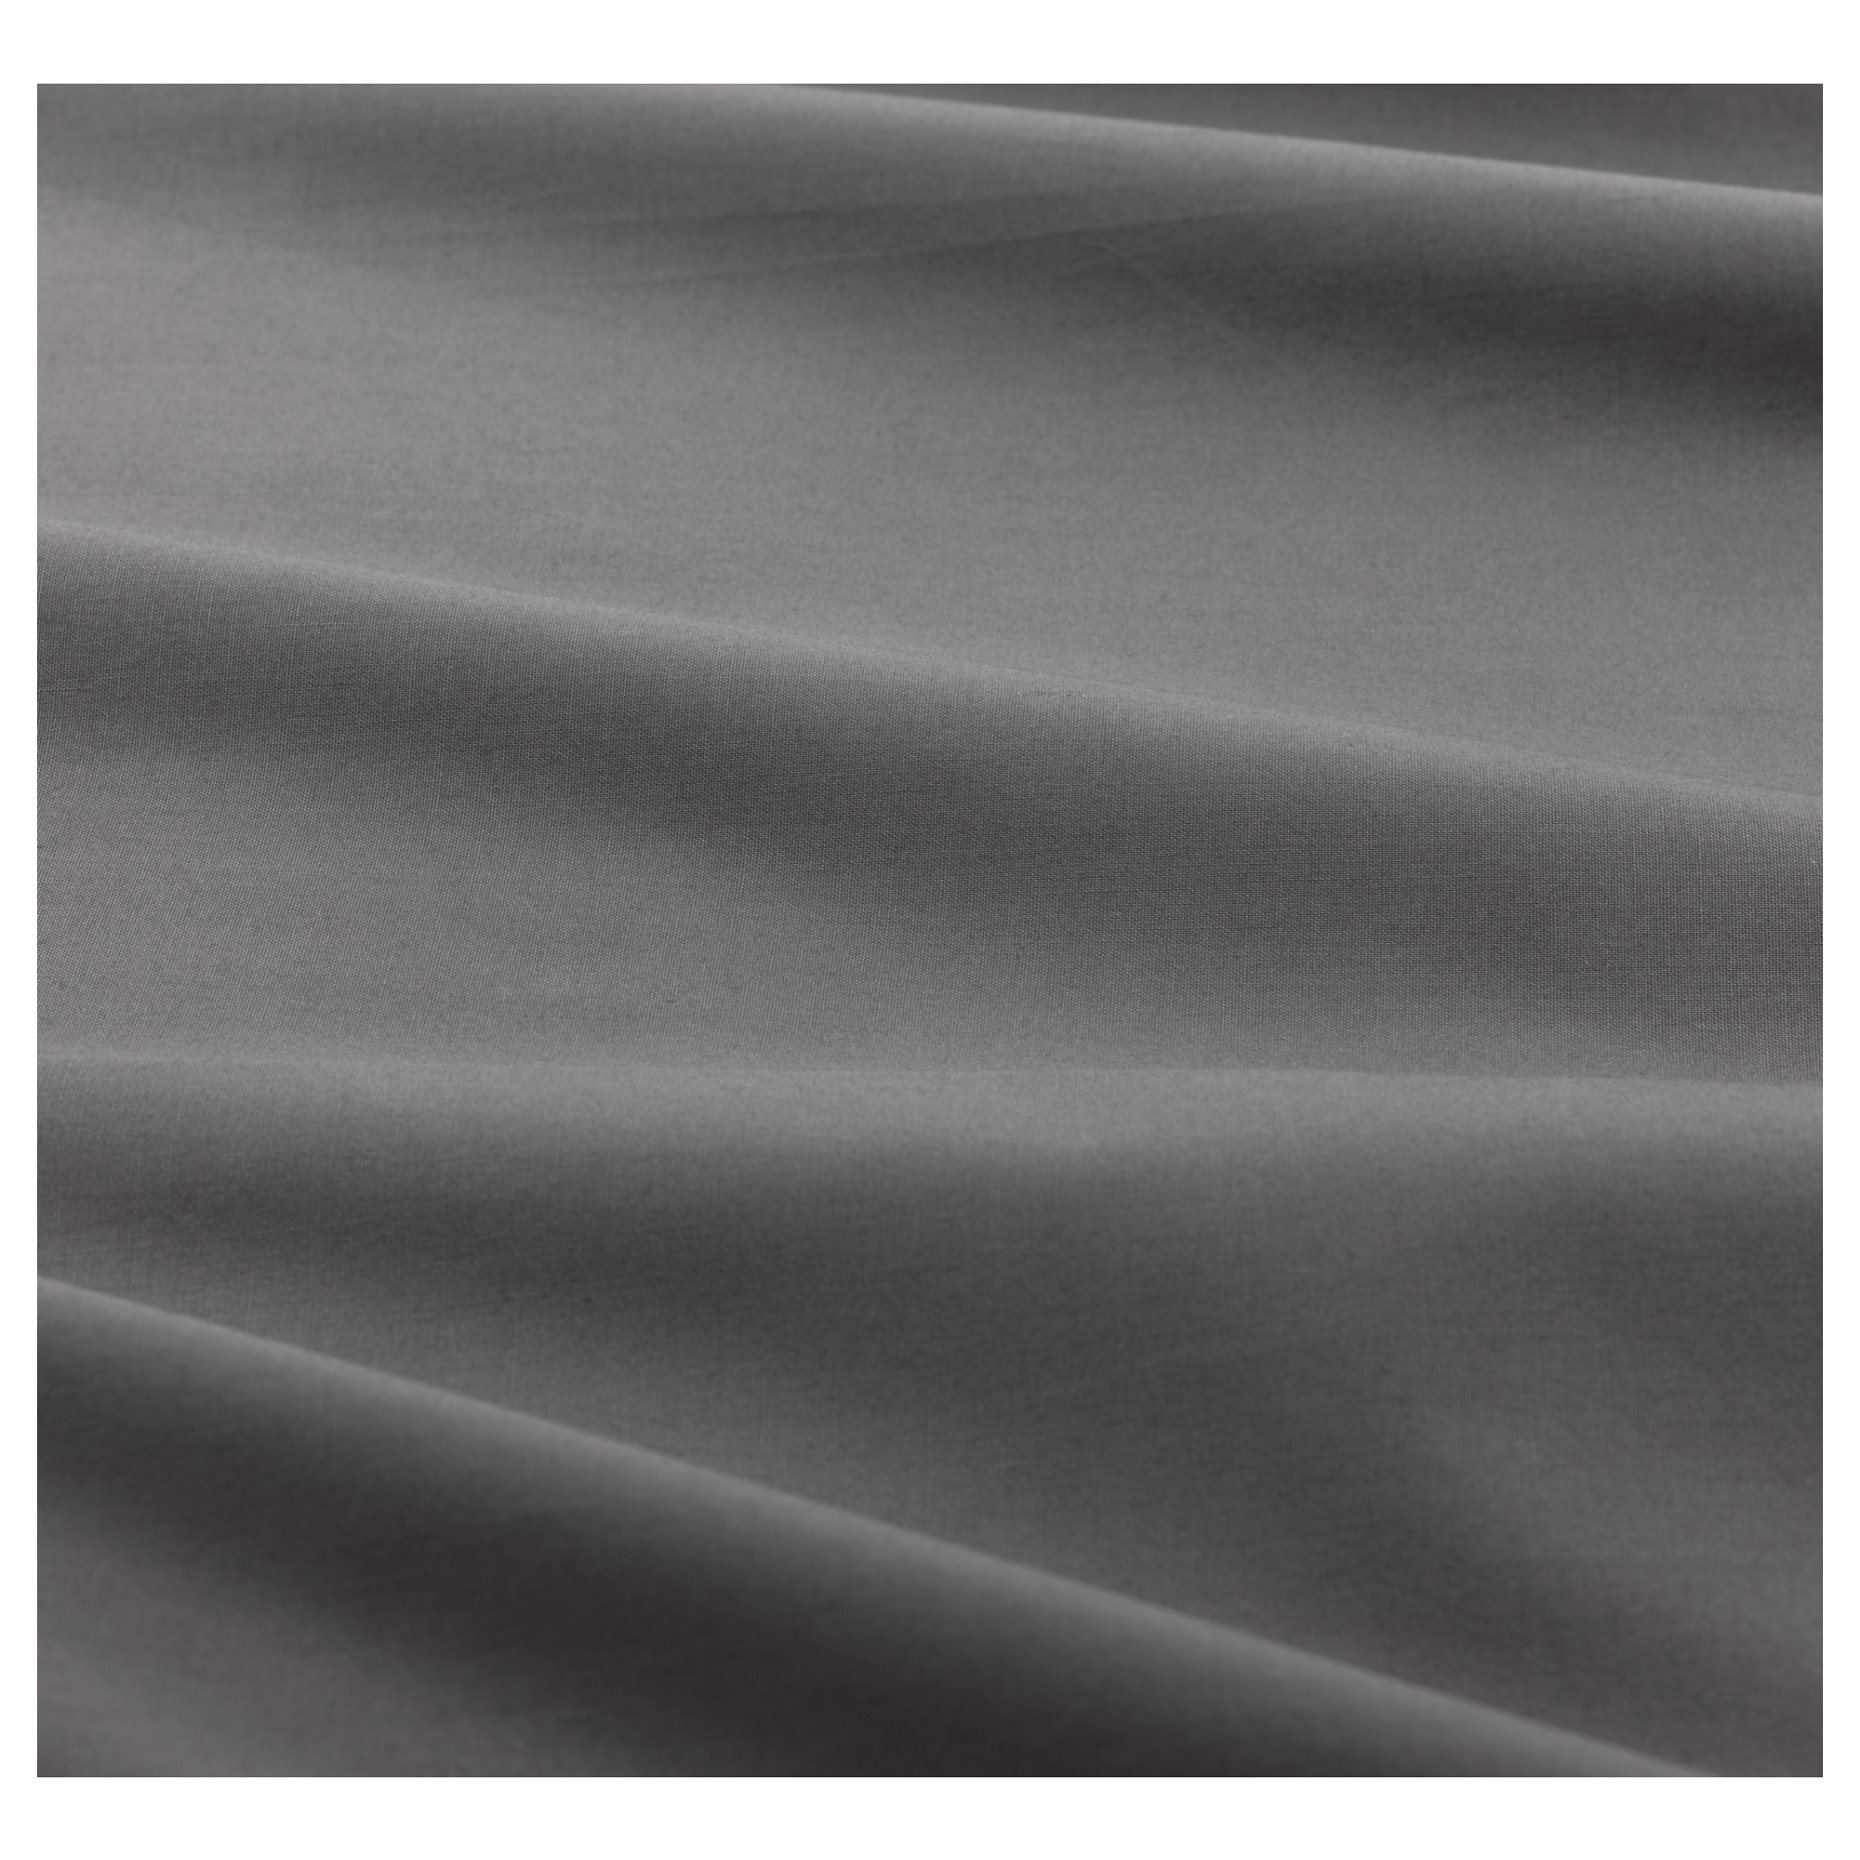 ULLVIDE, fitted sheet, 703.427.74